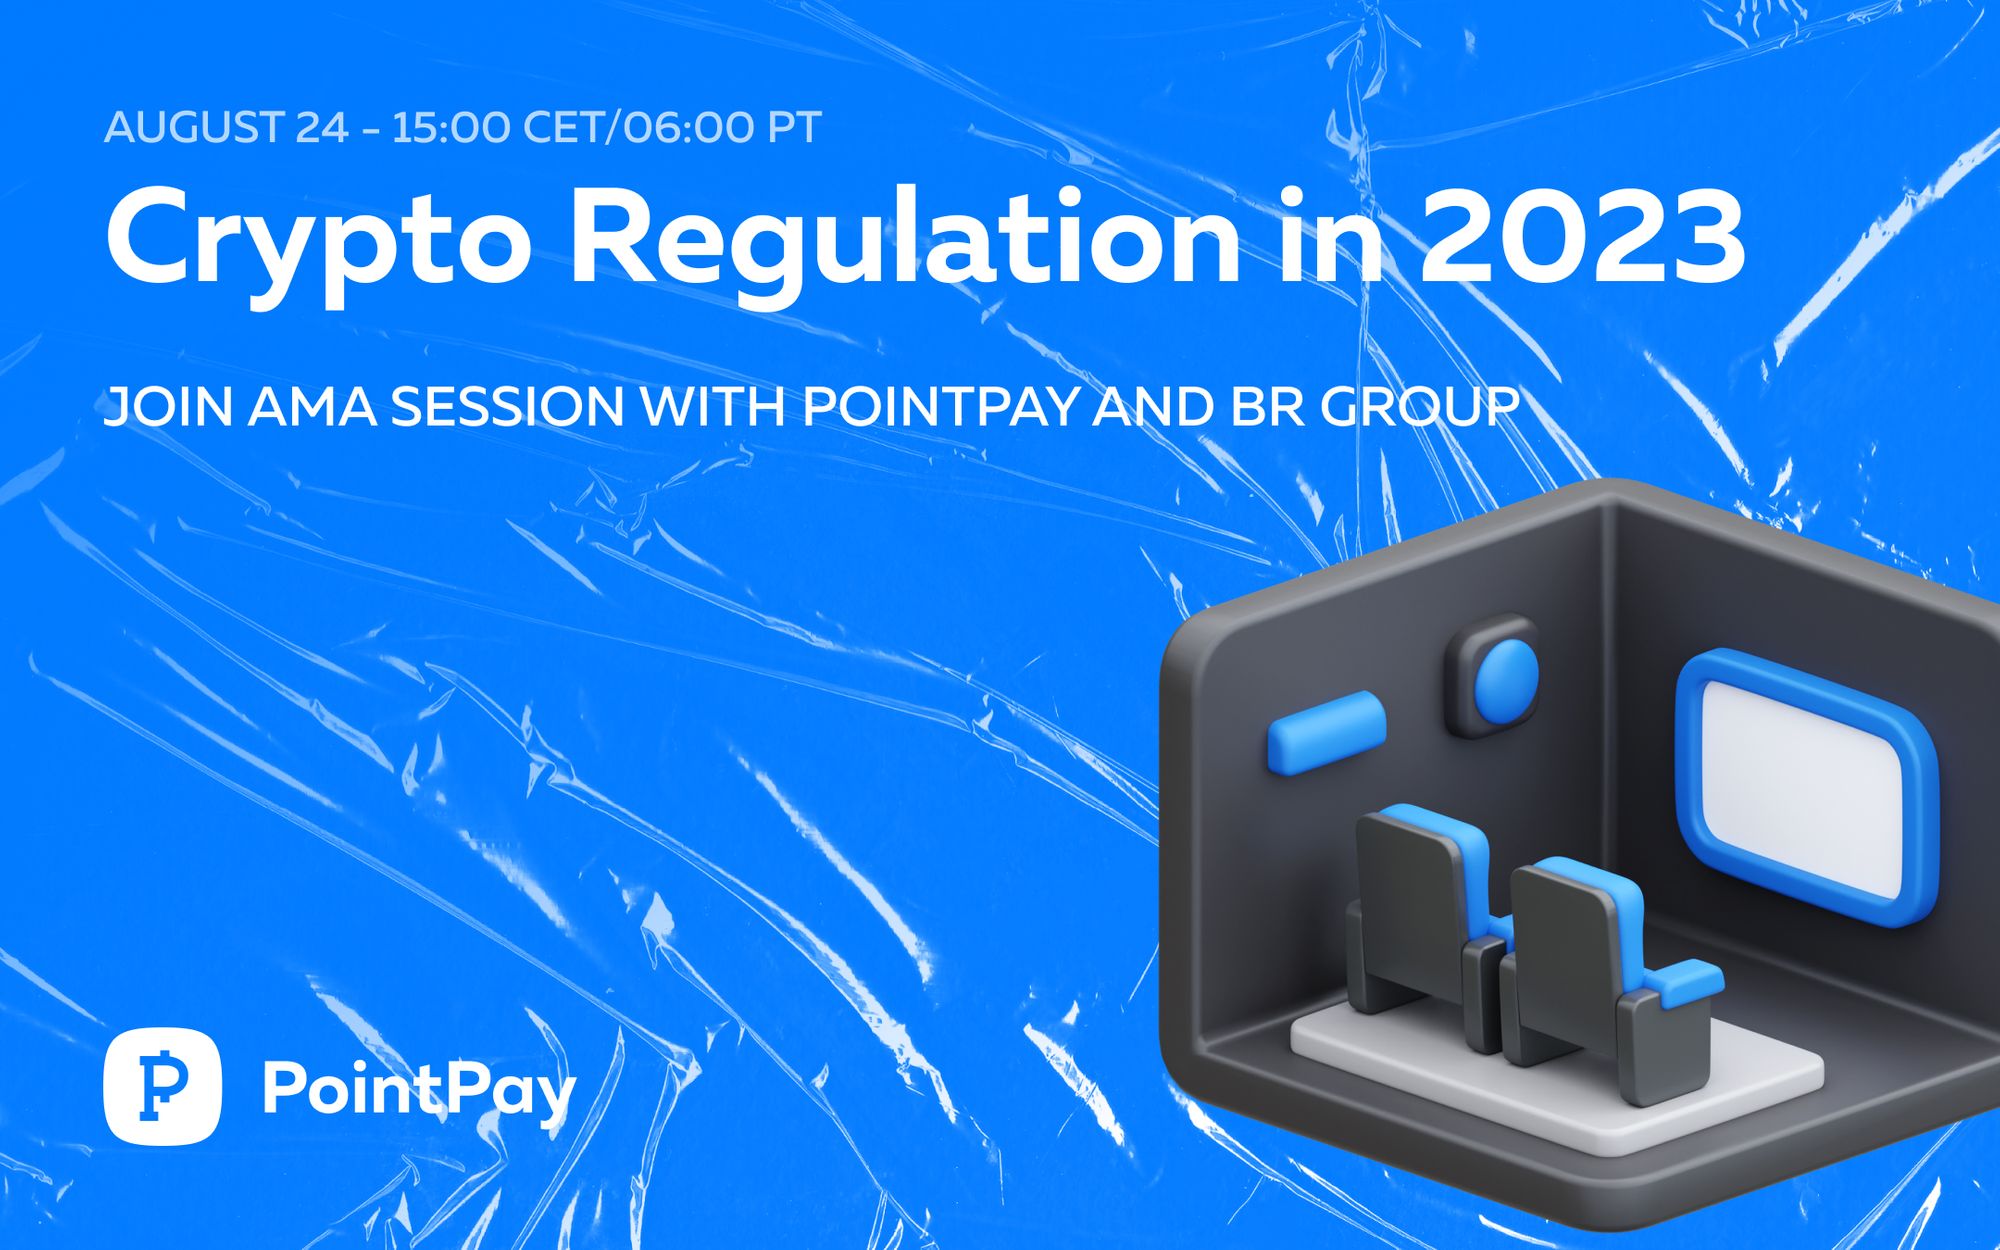 Join AMA session with PointPay and BR Group on 24th August!